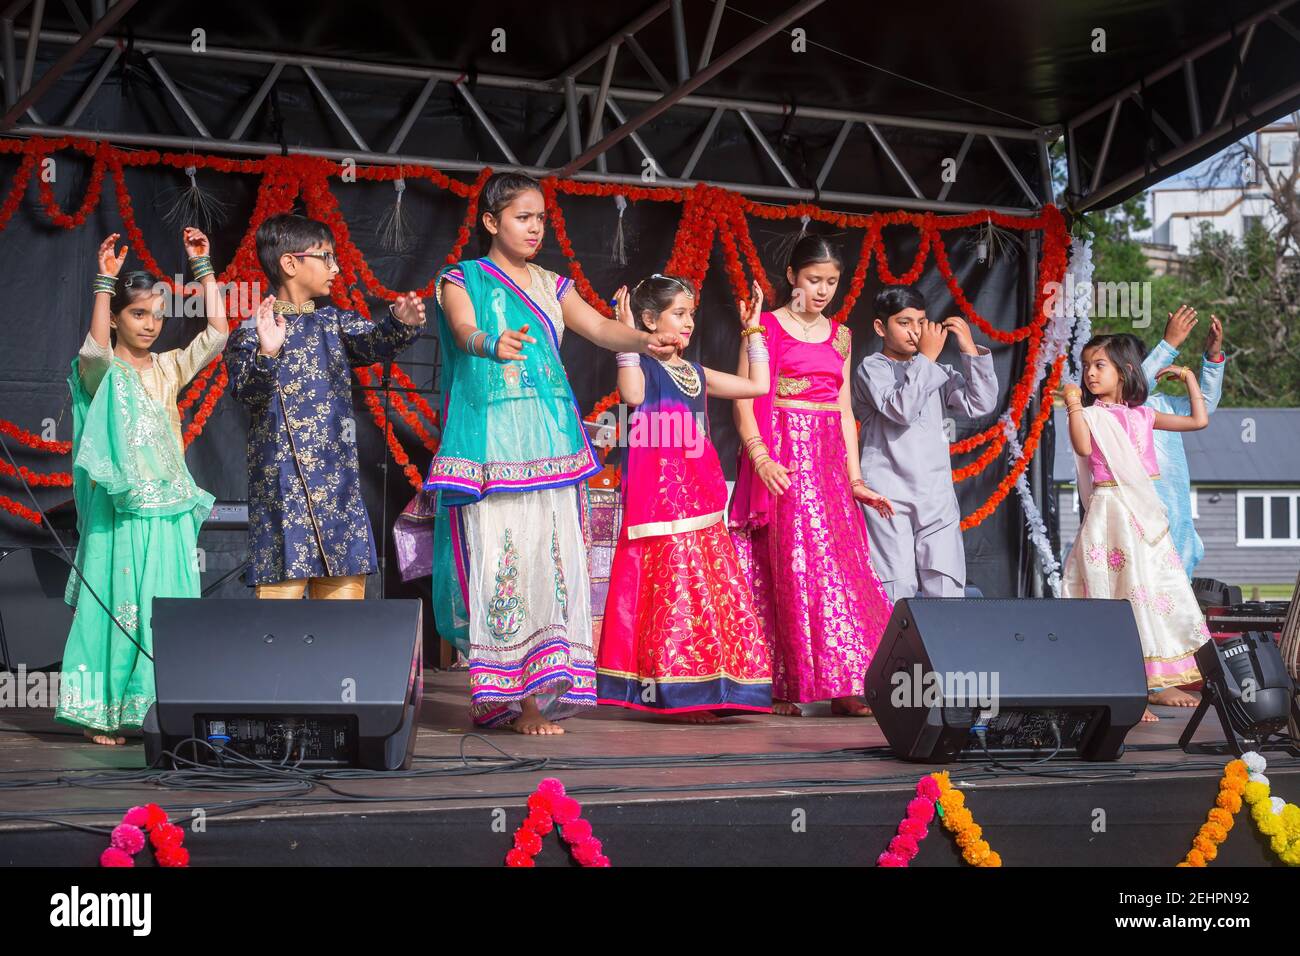 A group of children in traditional Indian clothing on stage during Diwali festival celebrations in Tauranga, New Zealand Stock Photo